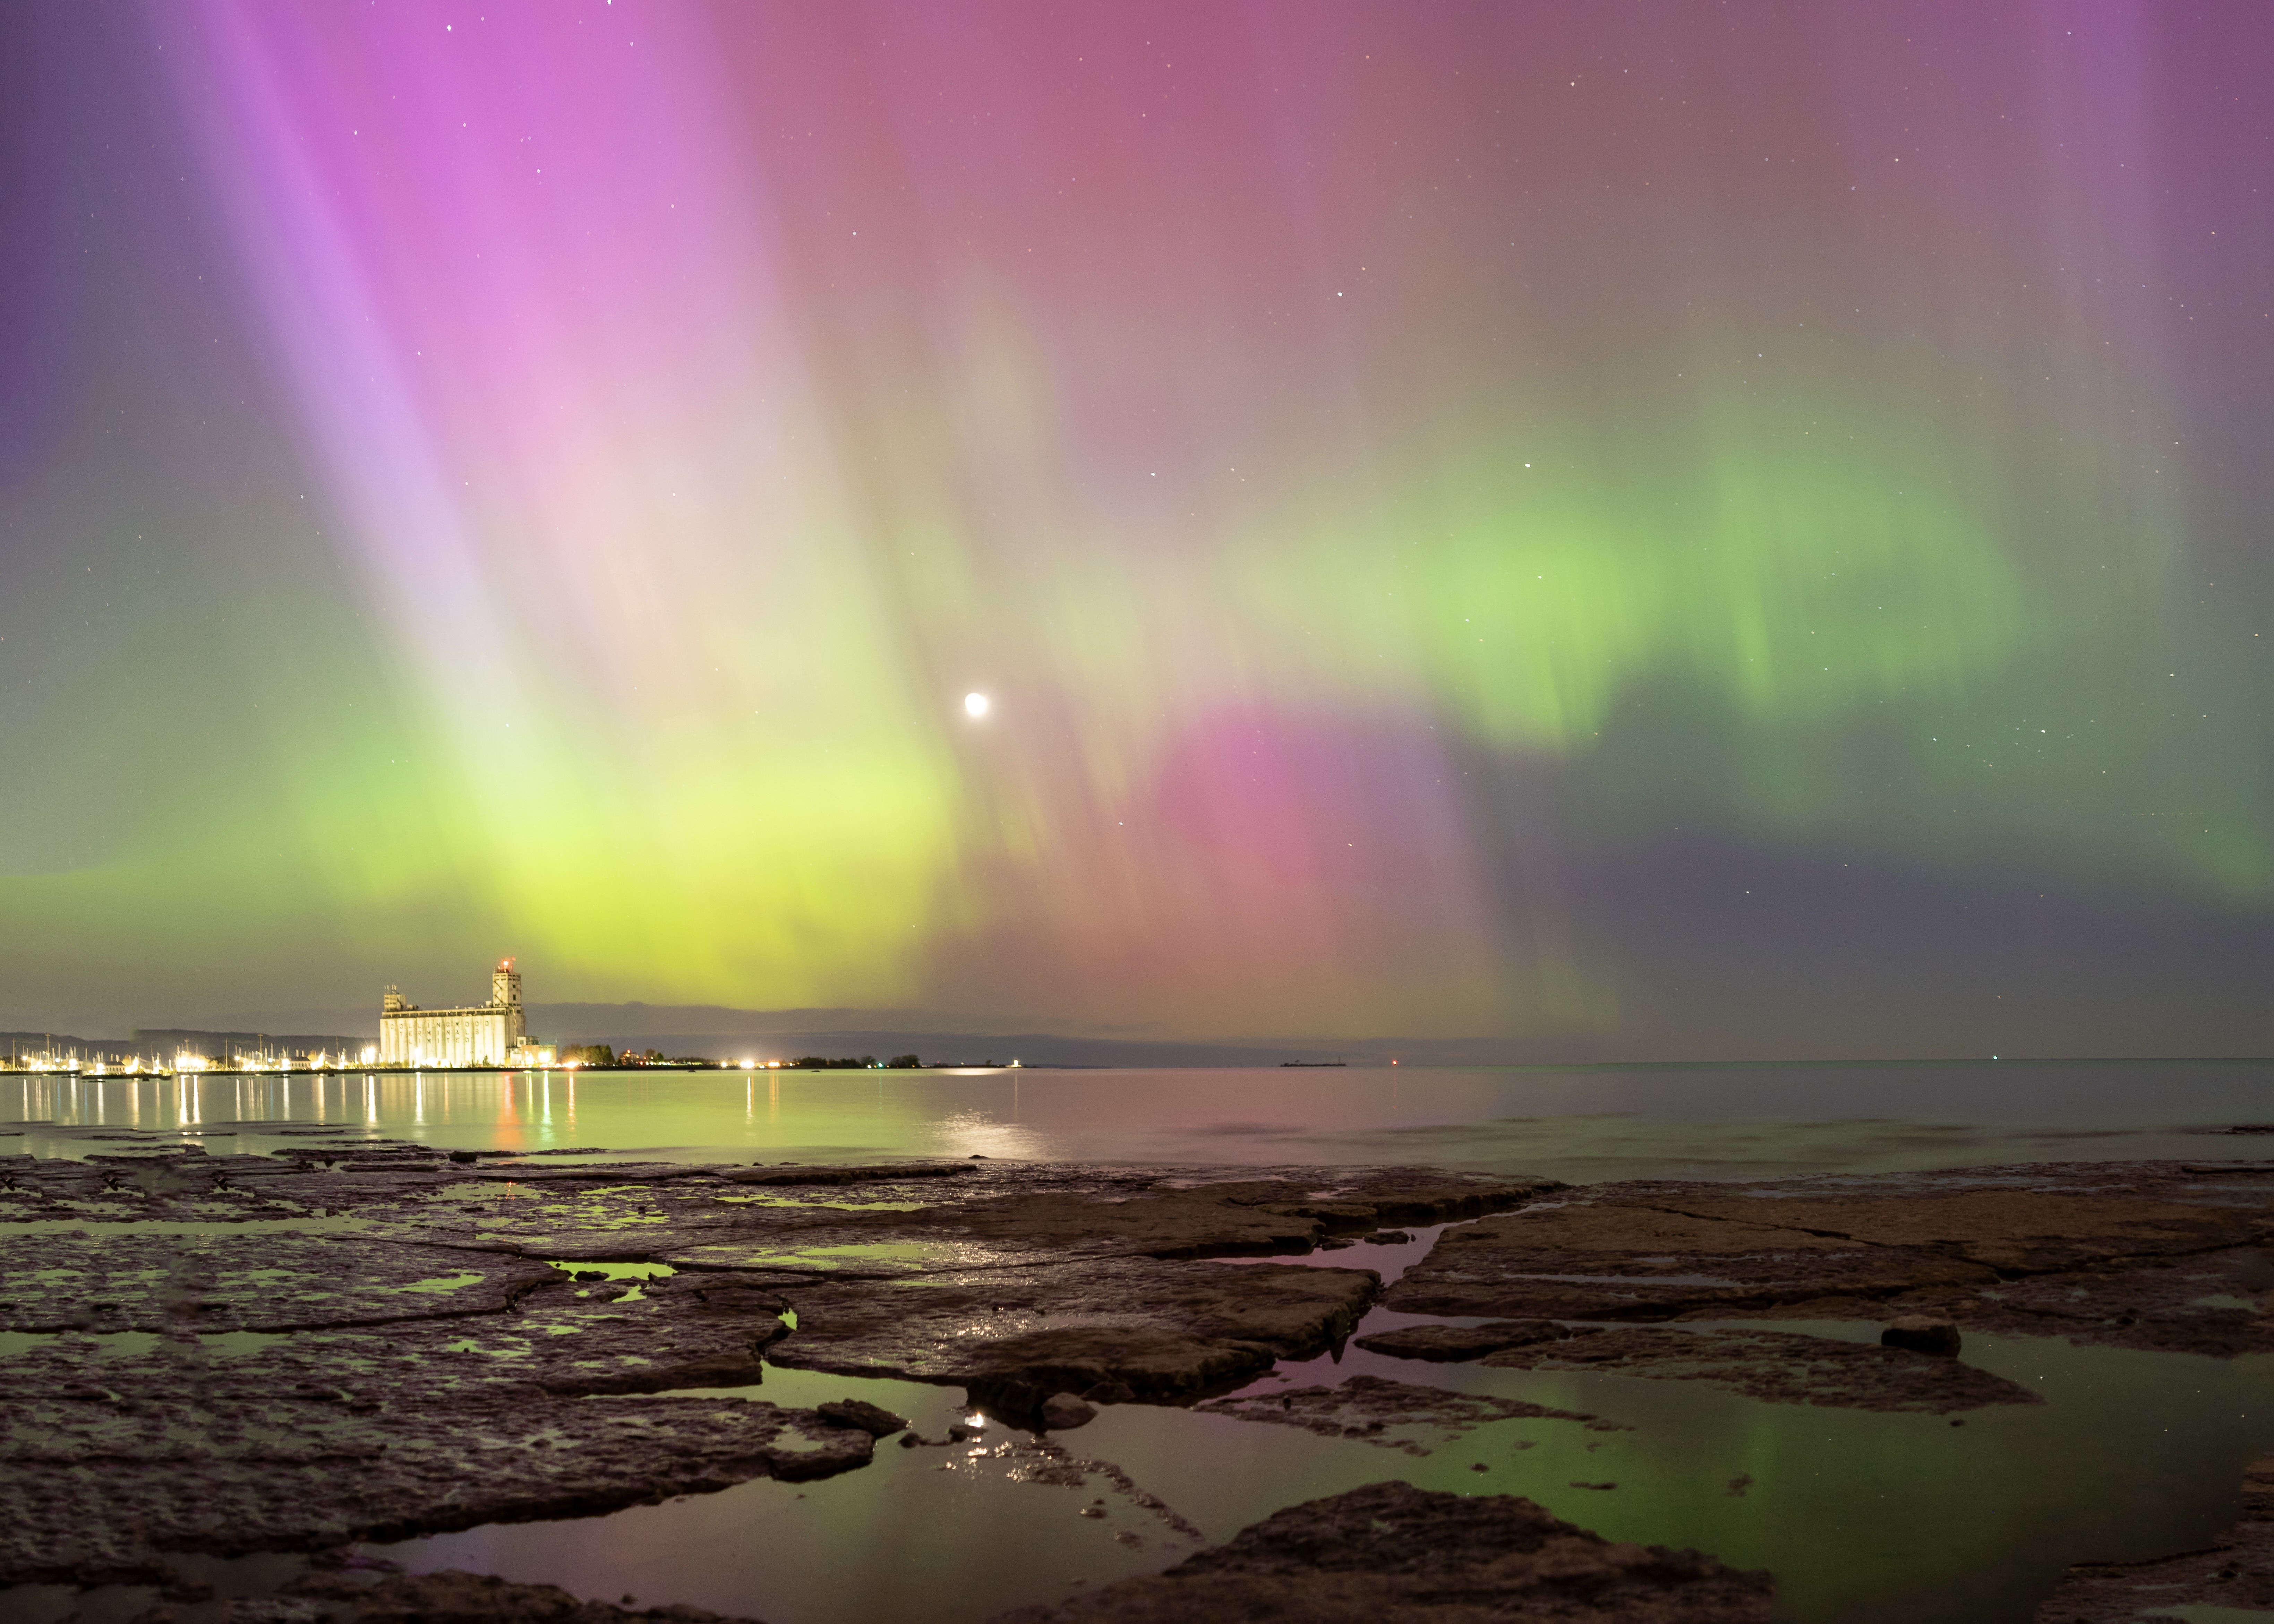 Ontario photographer chasing northern lights captures stunning images